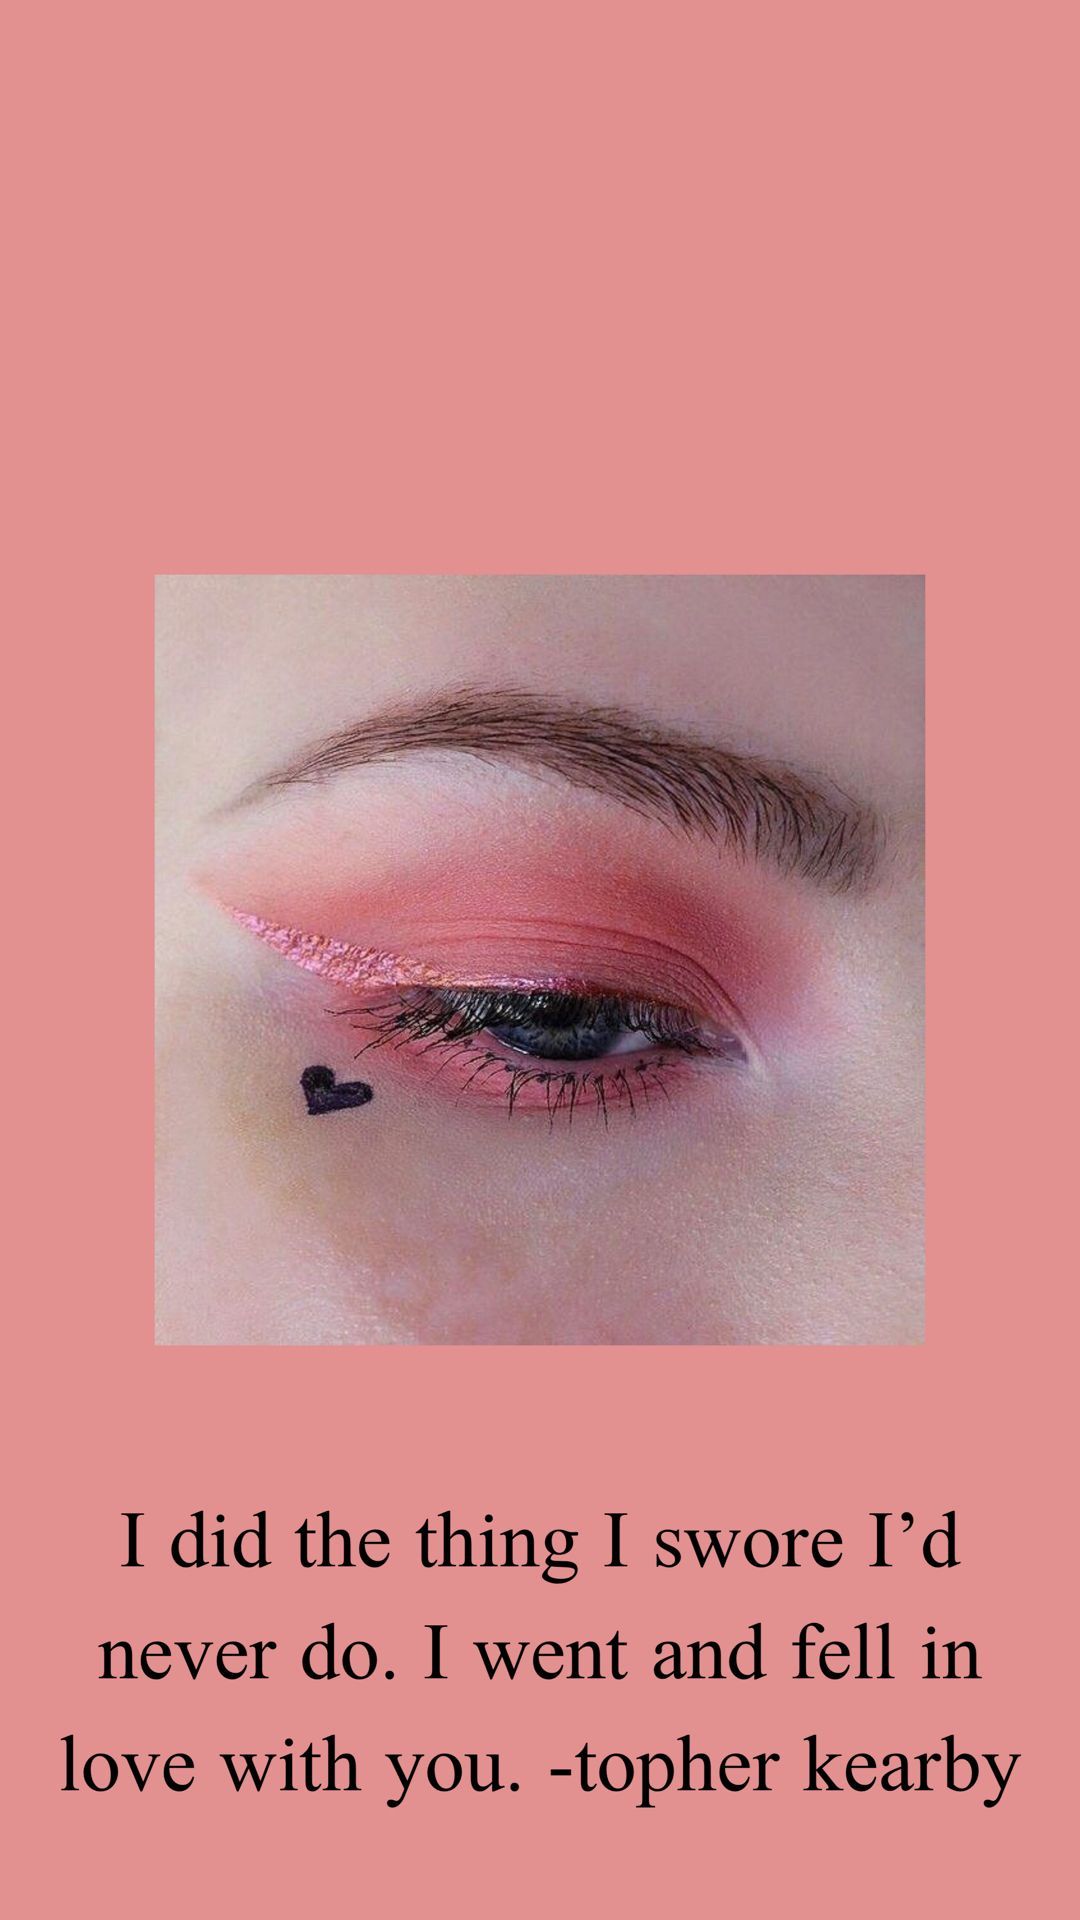 pink #peachy #coral #eye #makeup #heart #love #emotions #poetry #quote #topherkearby #aesth. iPhone wallpaper tumblr aesthetic, Makeup wallpaper, Aesthetic eyes